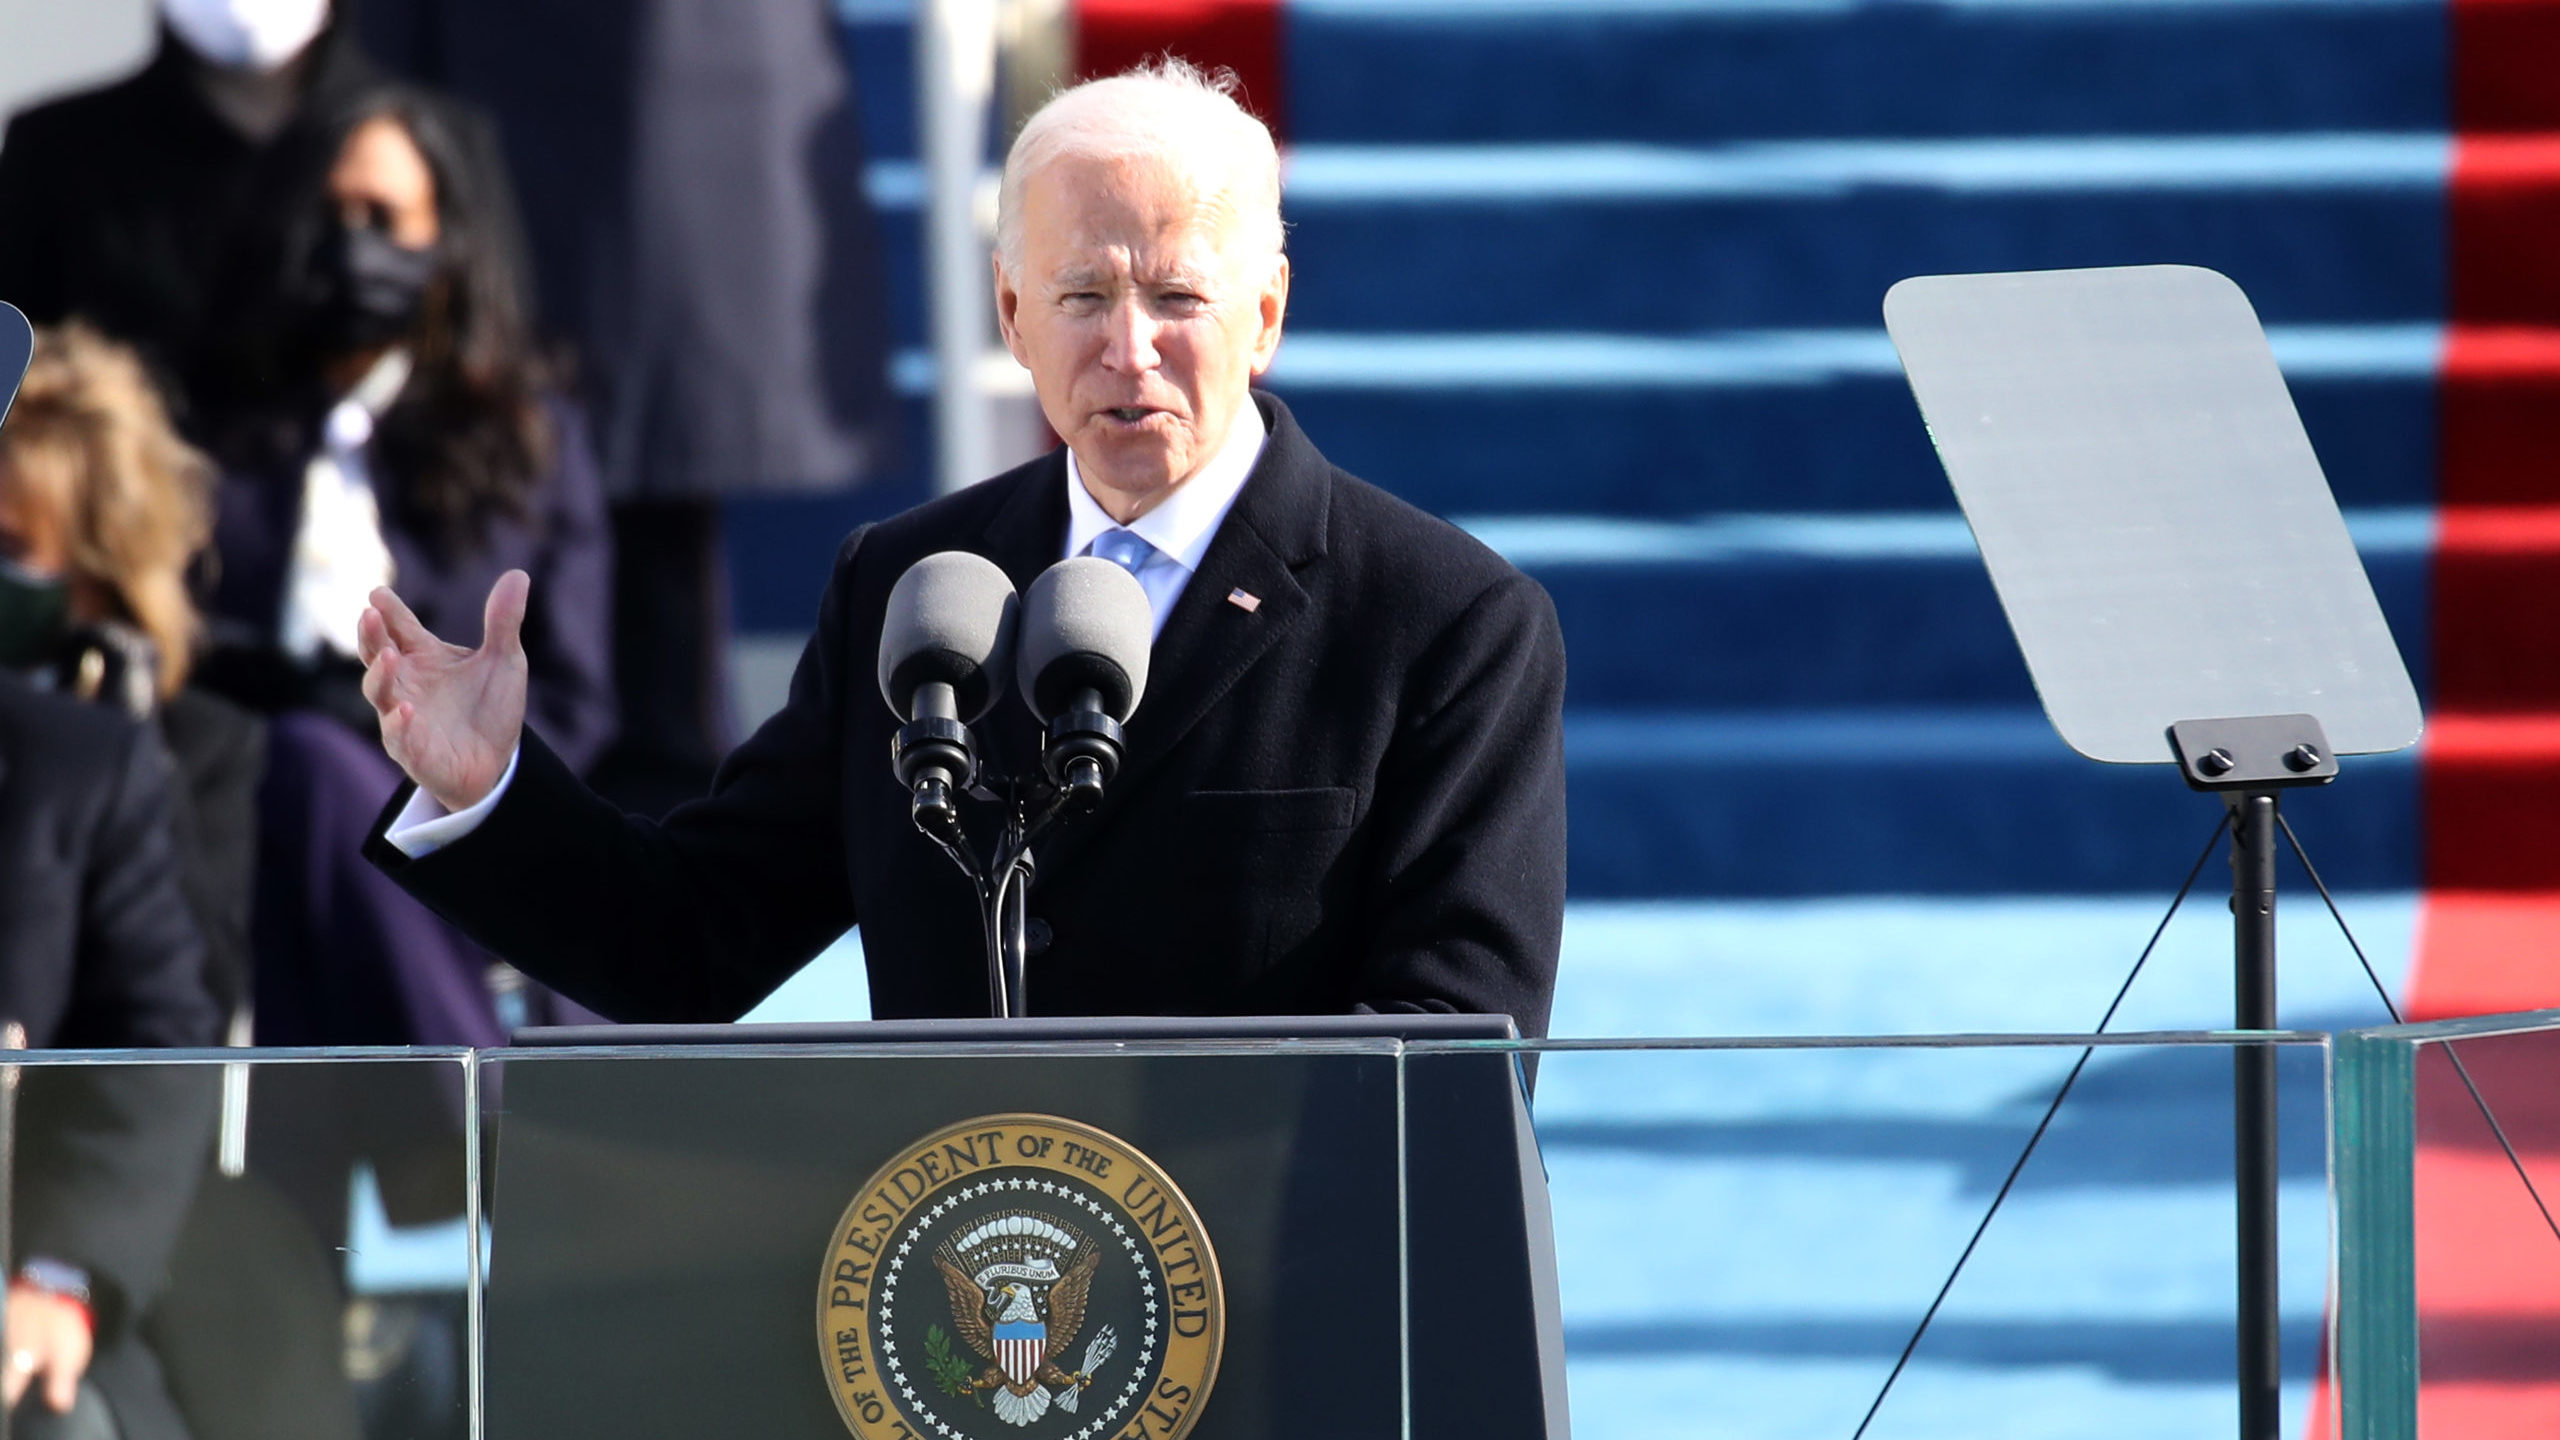 Middle East Provides Mixed Welcome for Biden